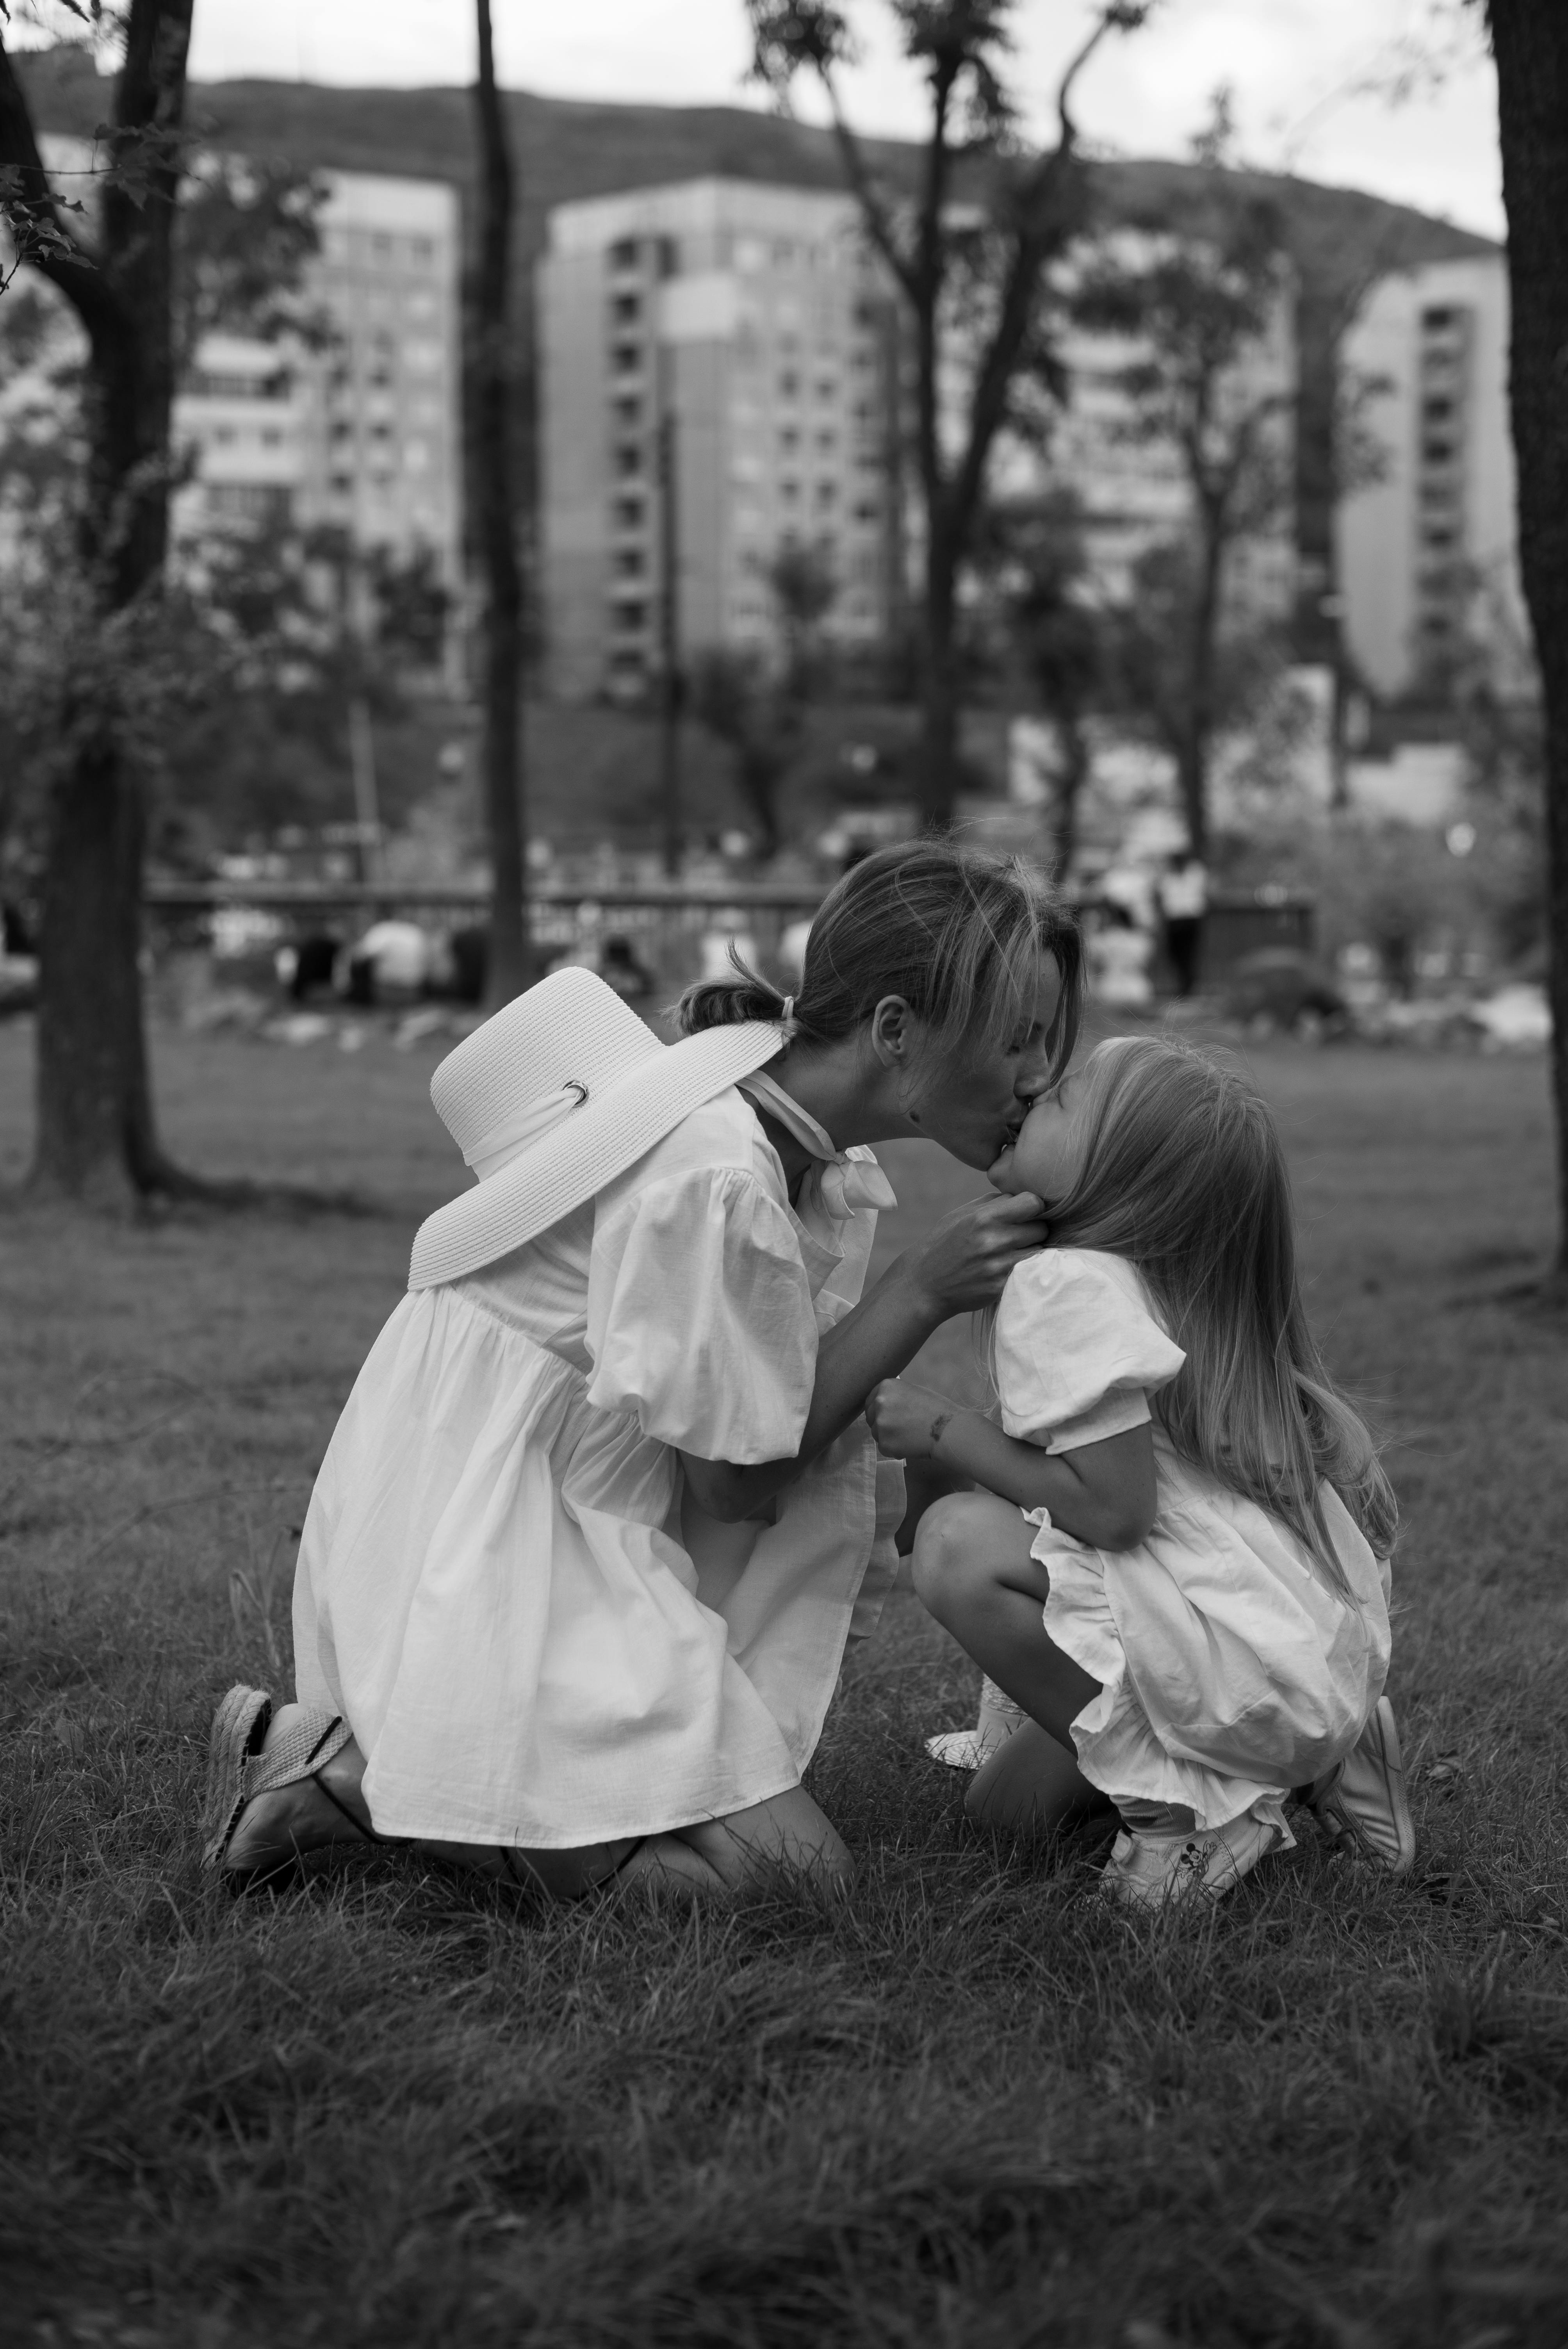 A mother and daughter kissing | Source: Pexels